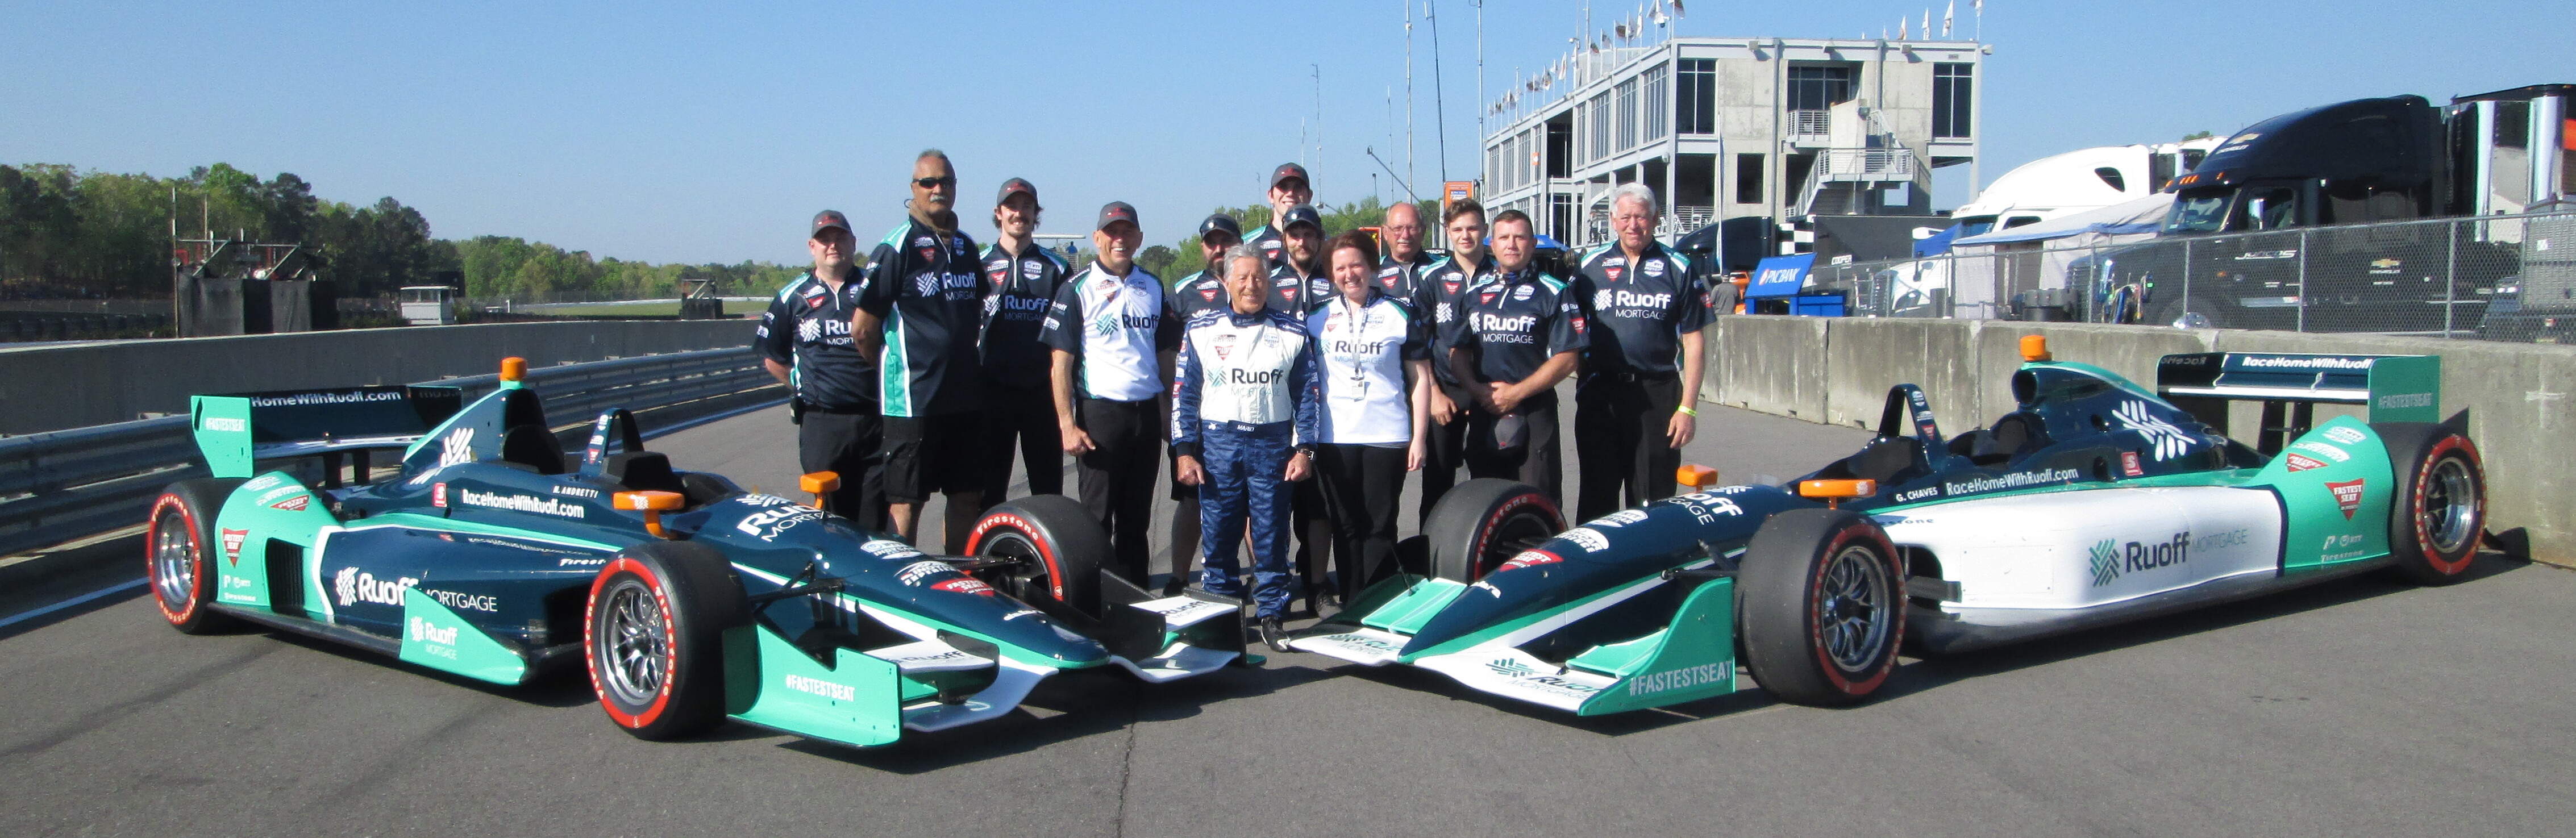 Indy Racing Experiences